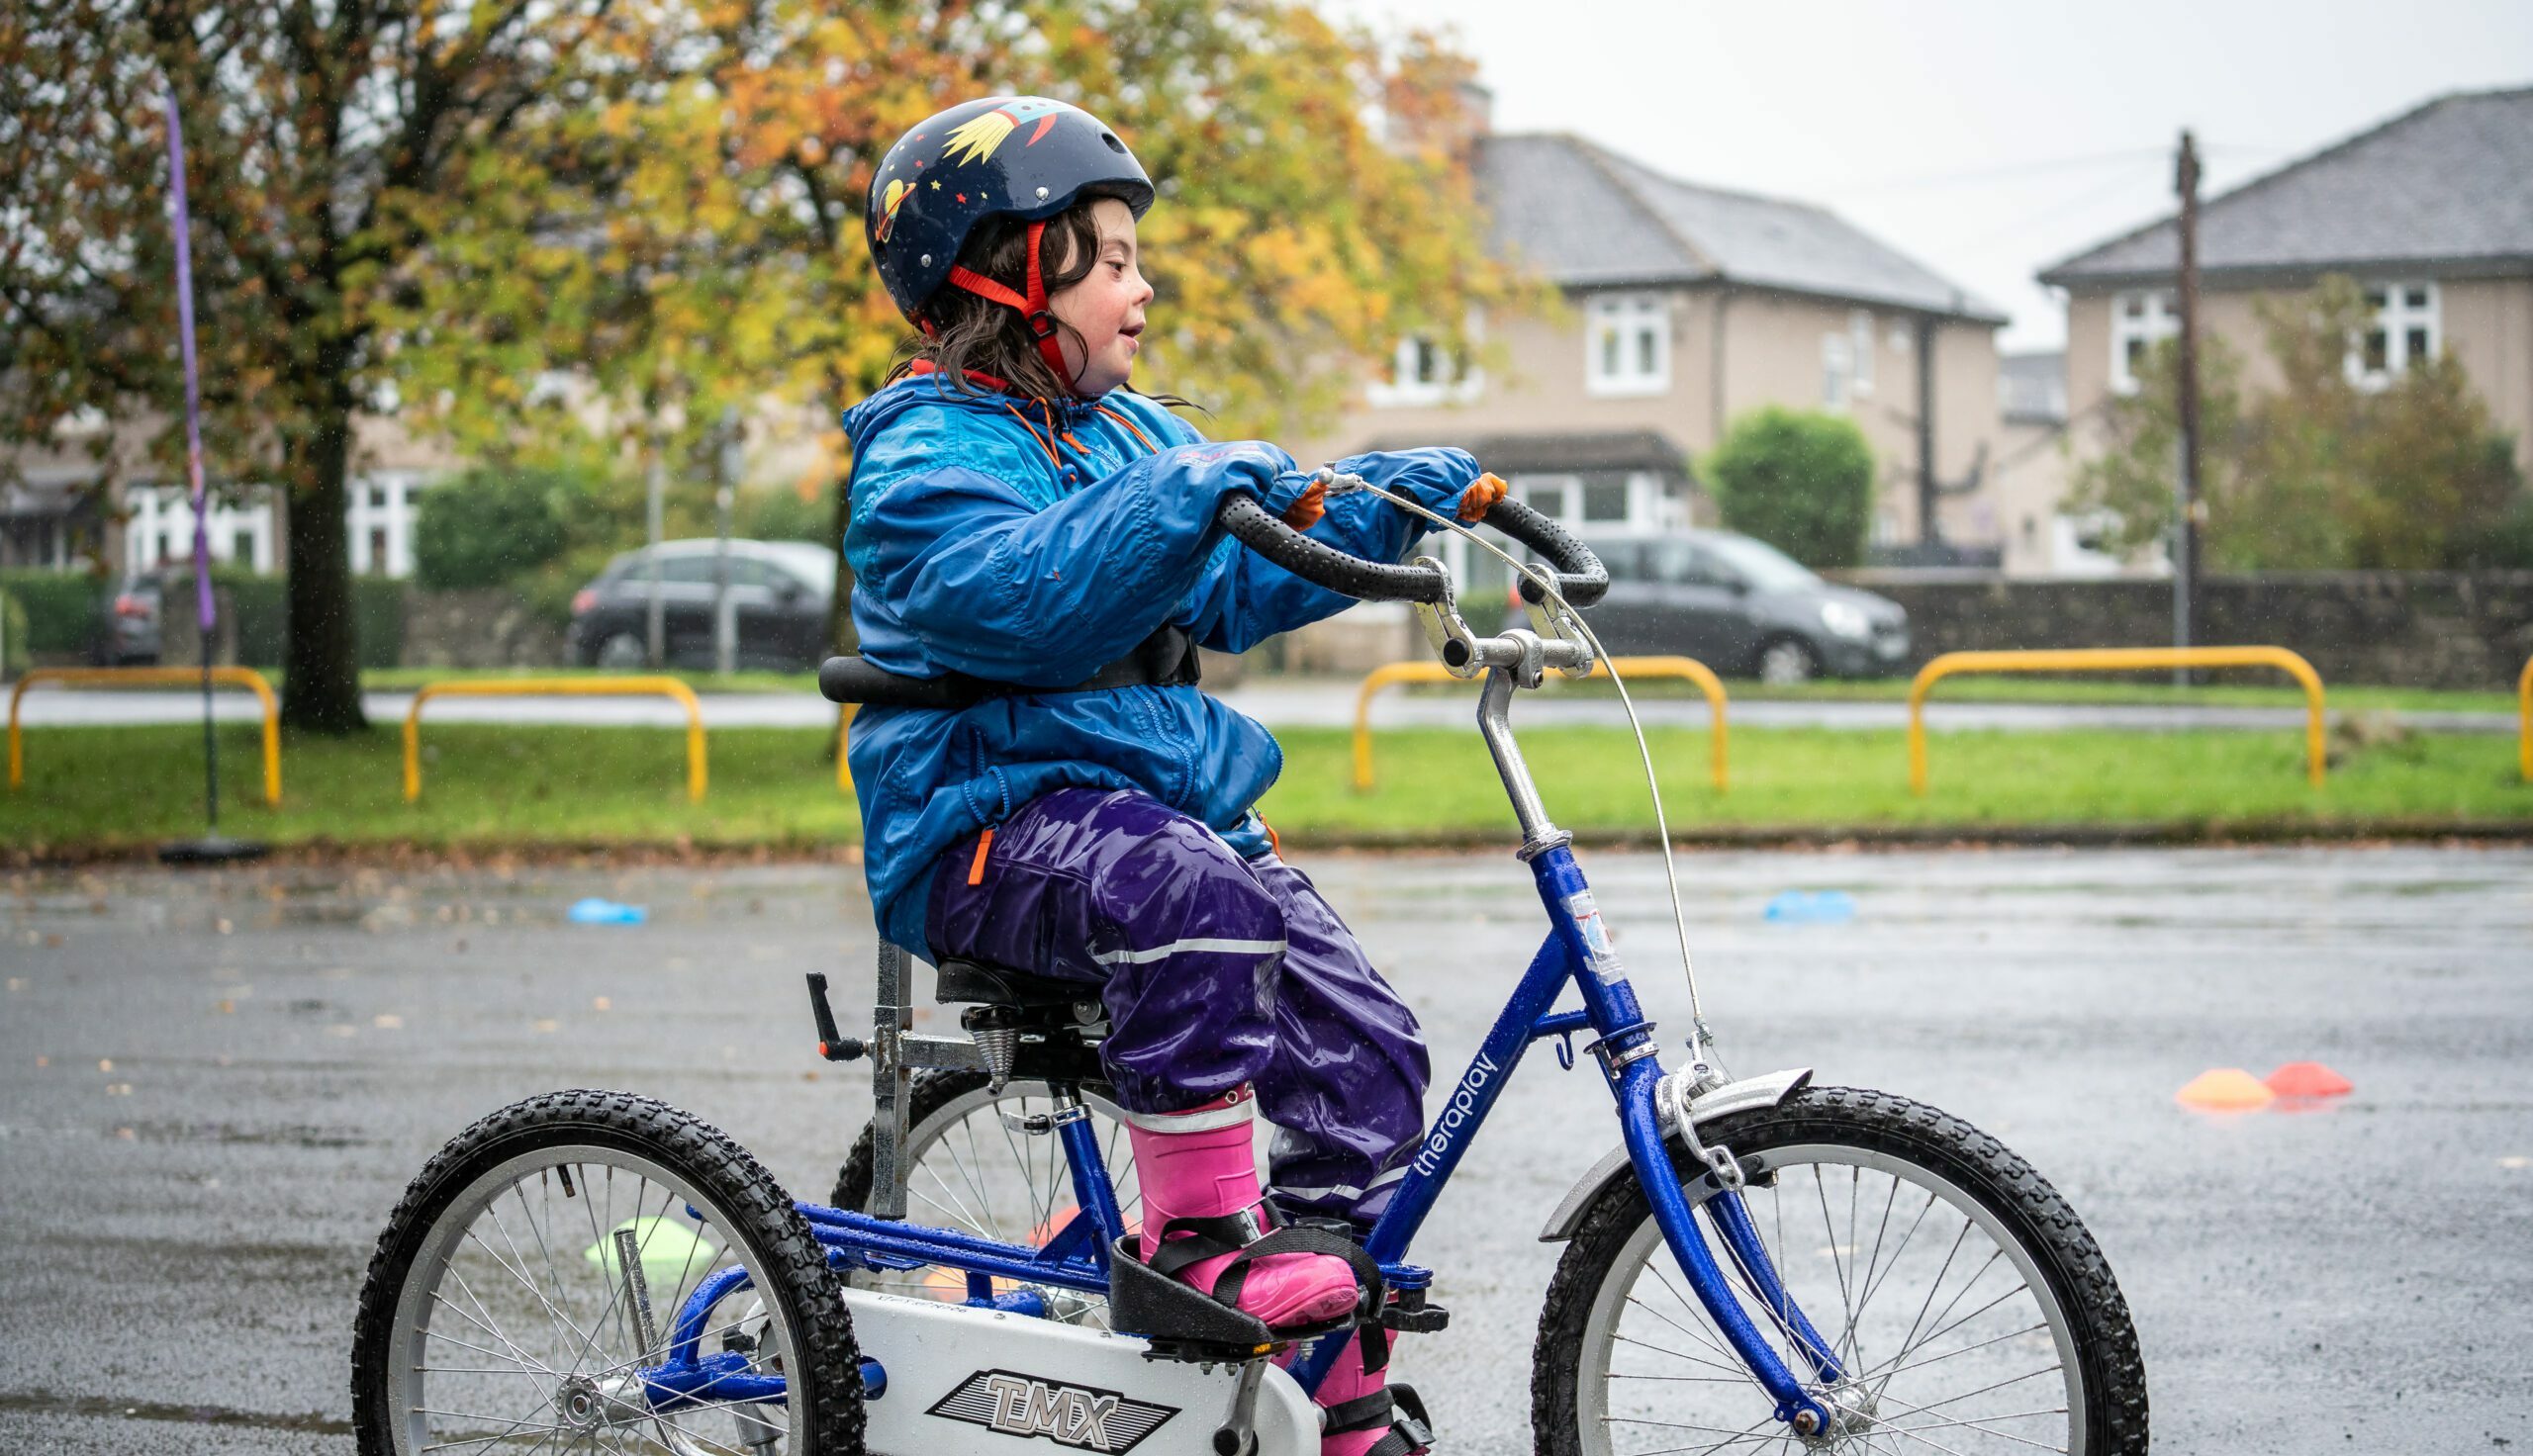 A Bikeability student riding a tricycle. They are wearing a blue coat and a helmet with star stickers on it.